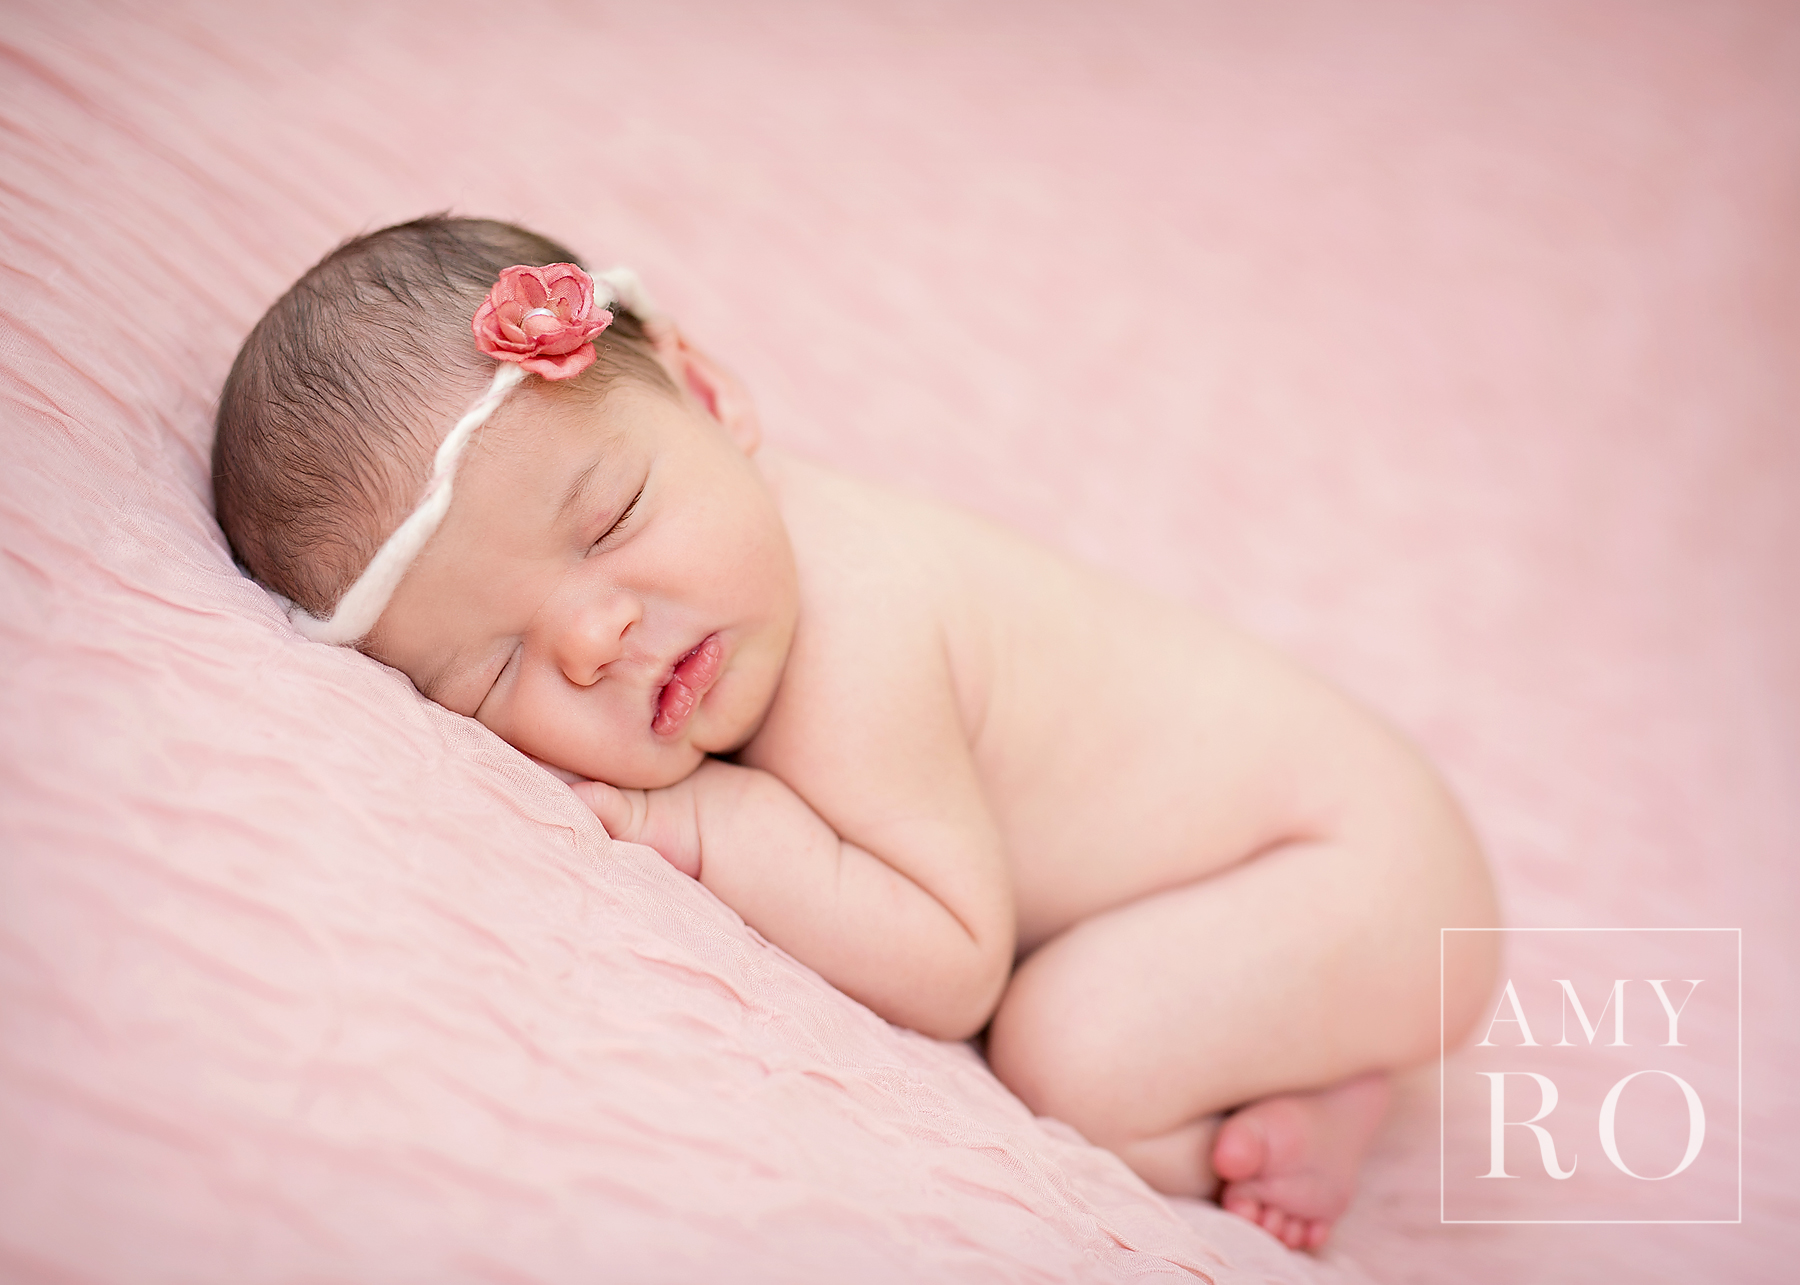 Beautiful image of newborn girl on pink backdrop with flower head band curled and sleeping during a newborn photography lifestyle session in Rhode Island